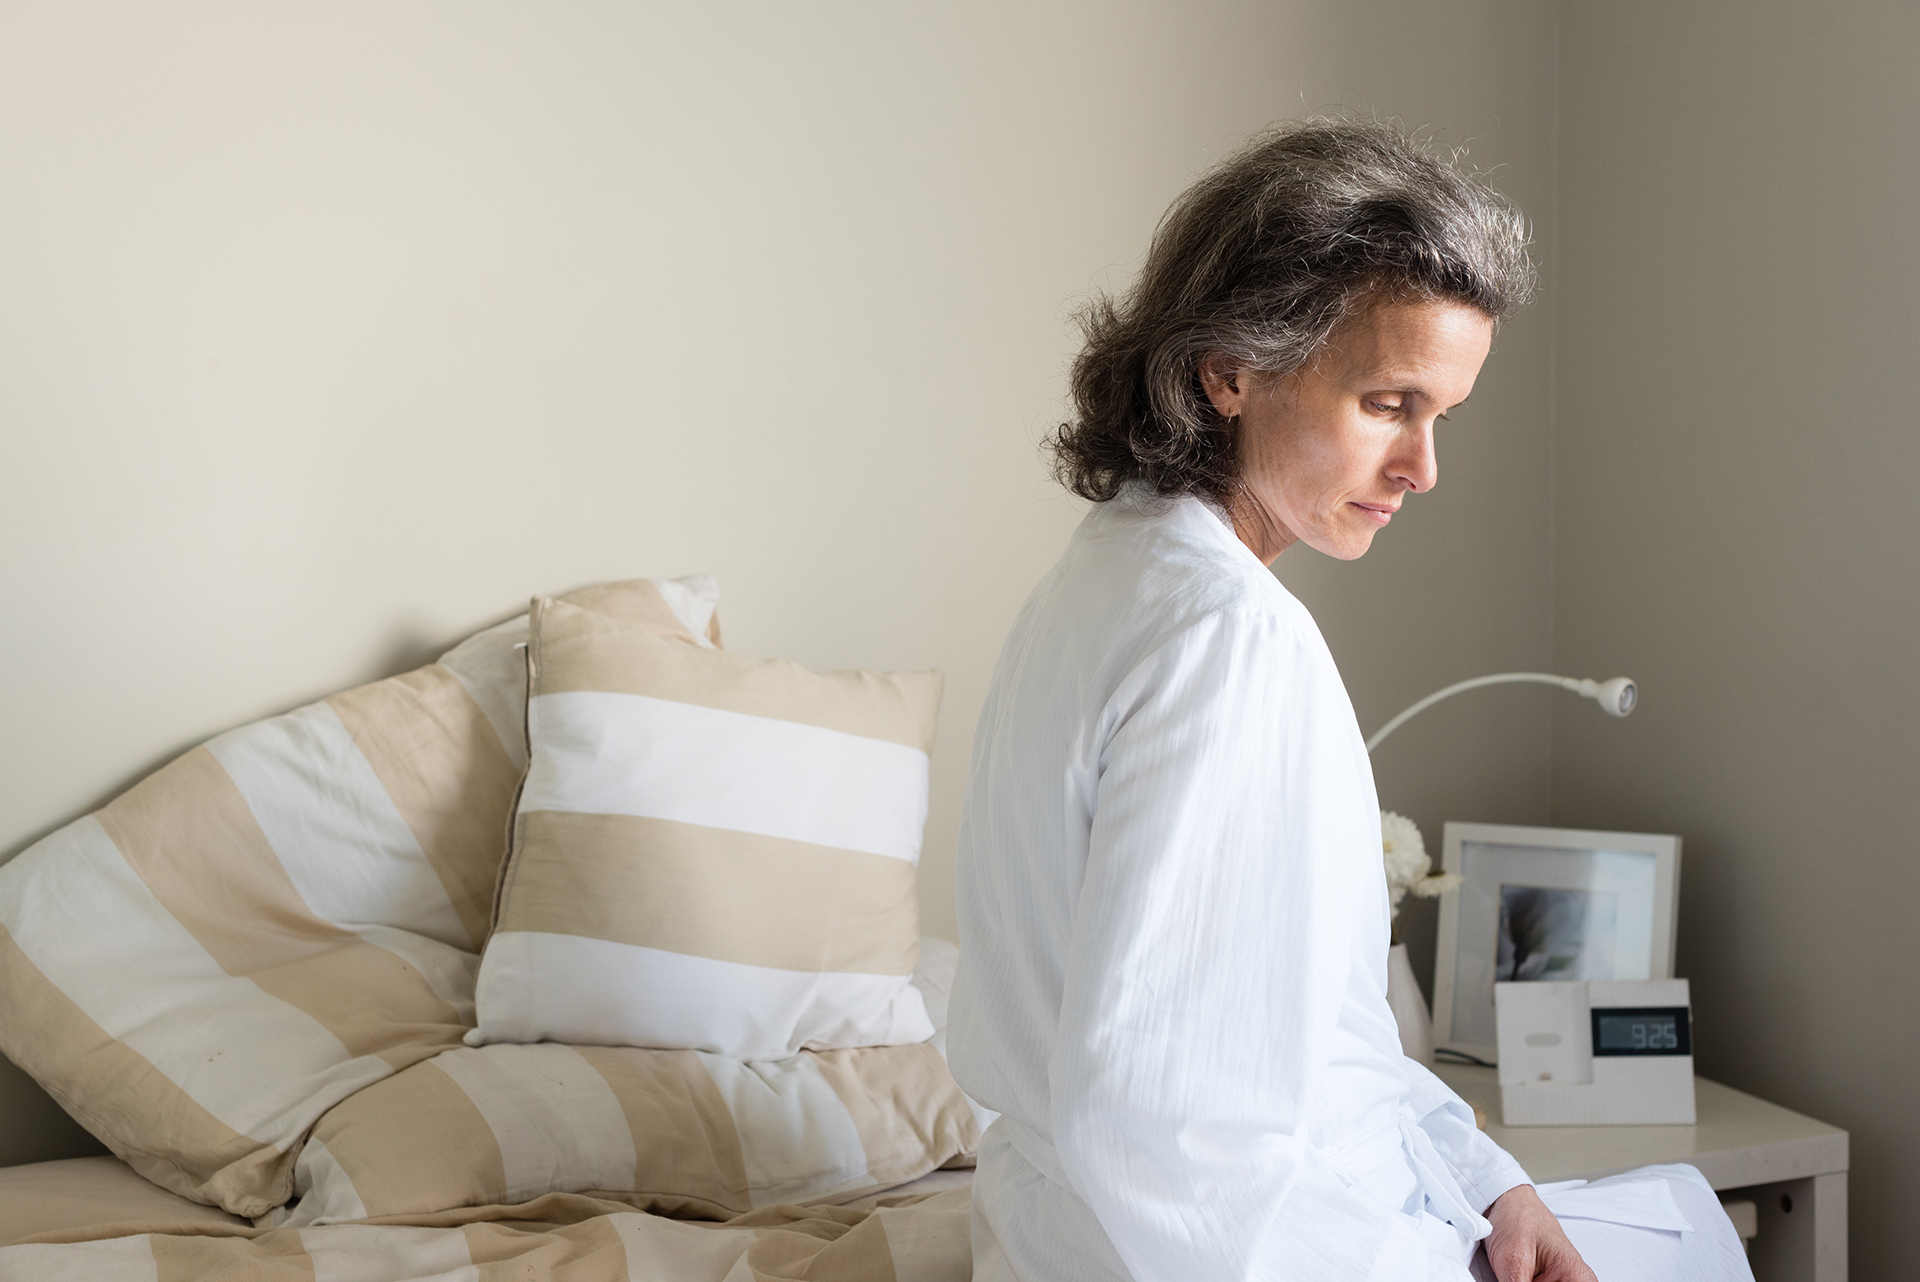 Middle aged woman in white bathrobe seated on bed looking pensive.